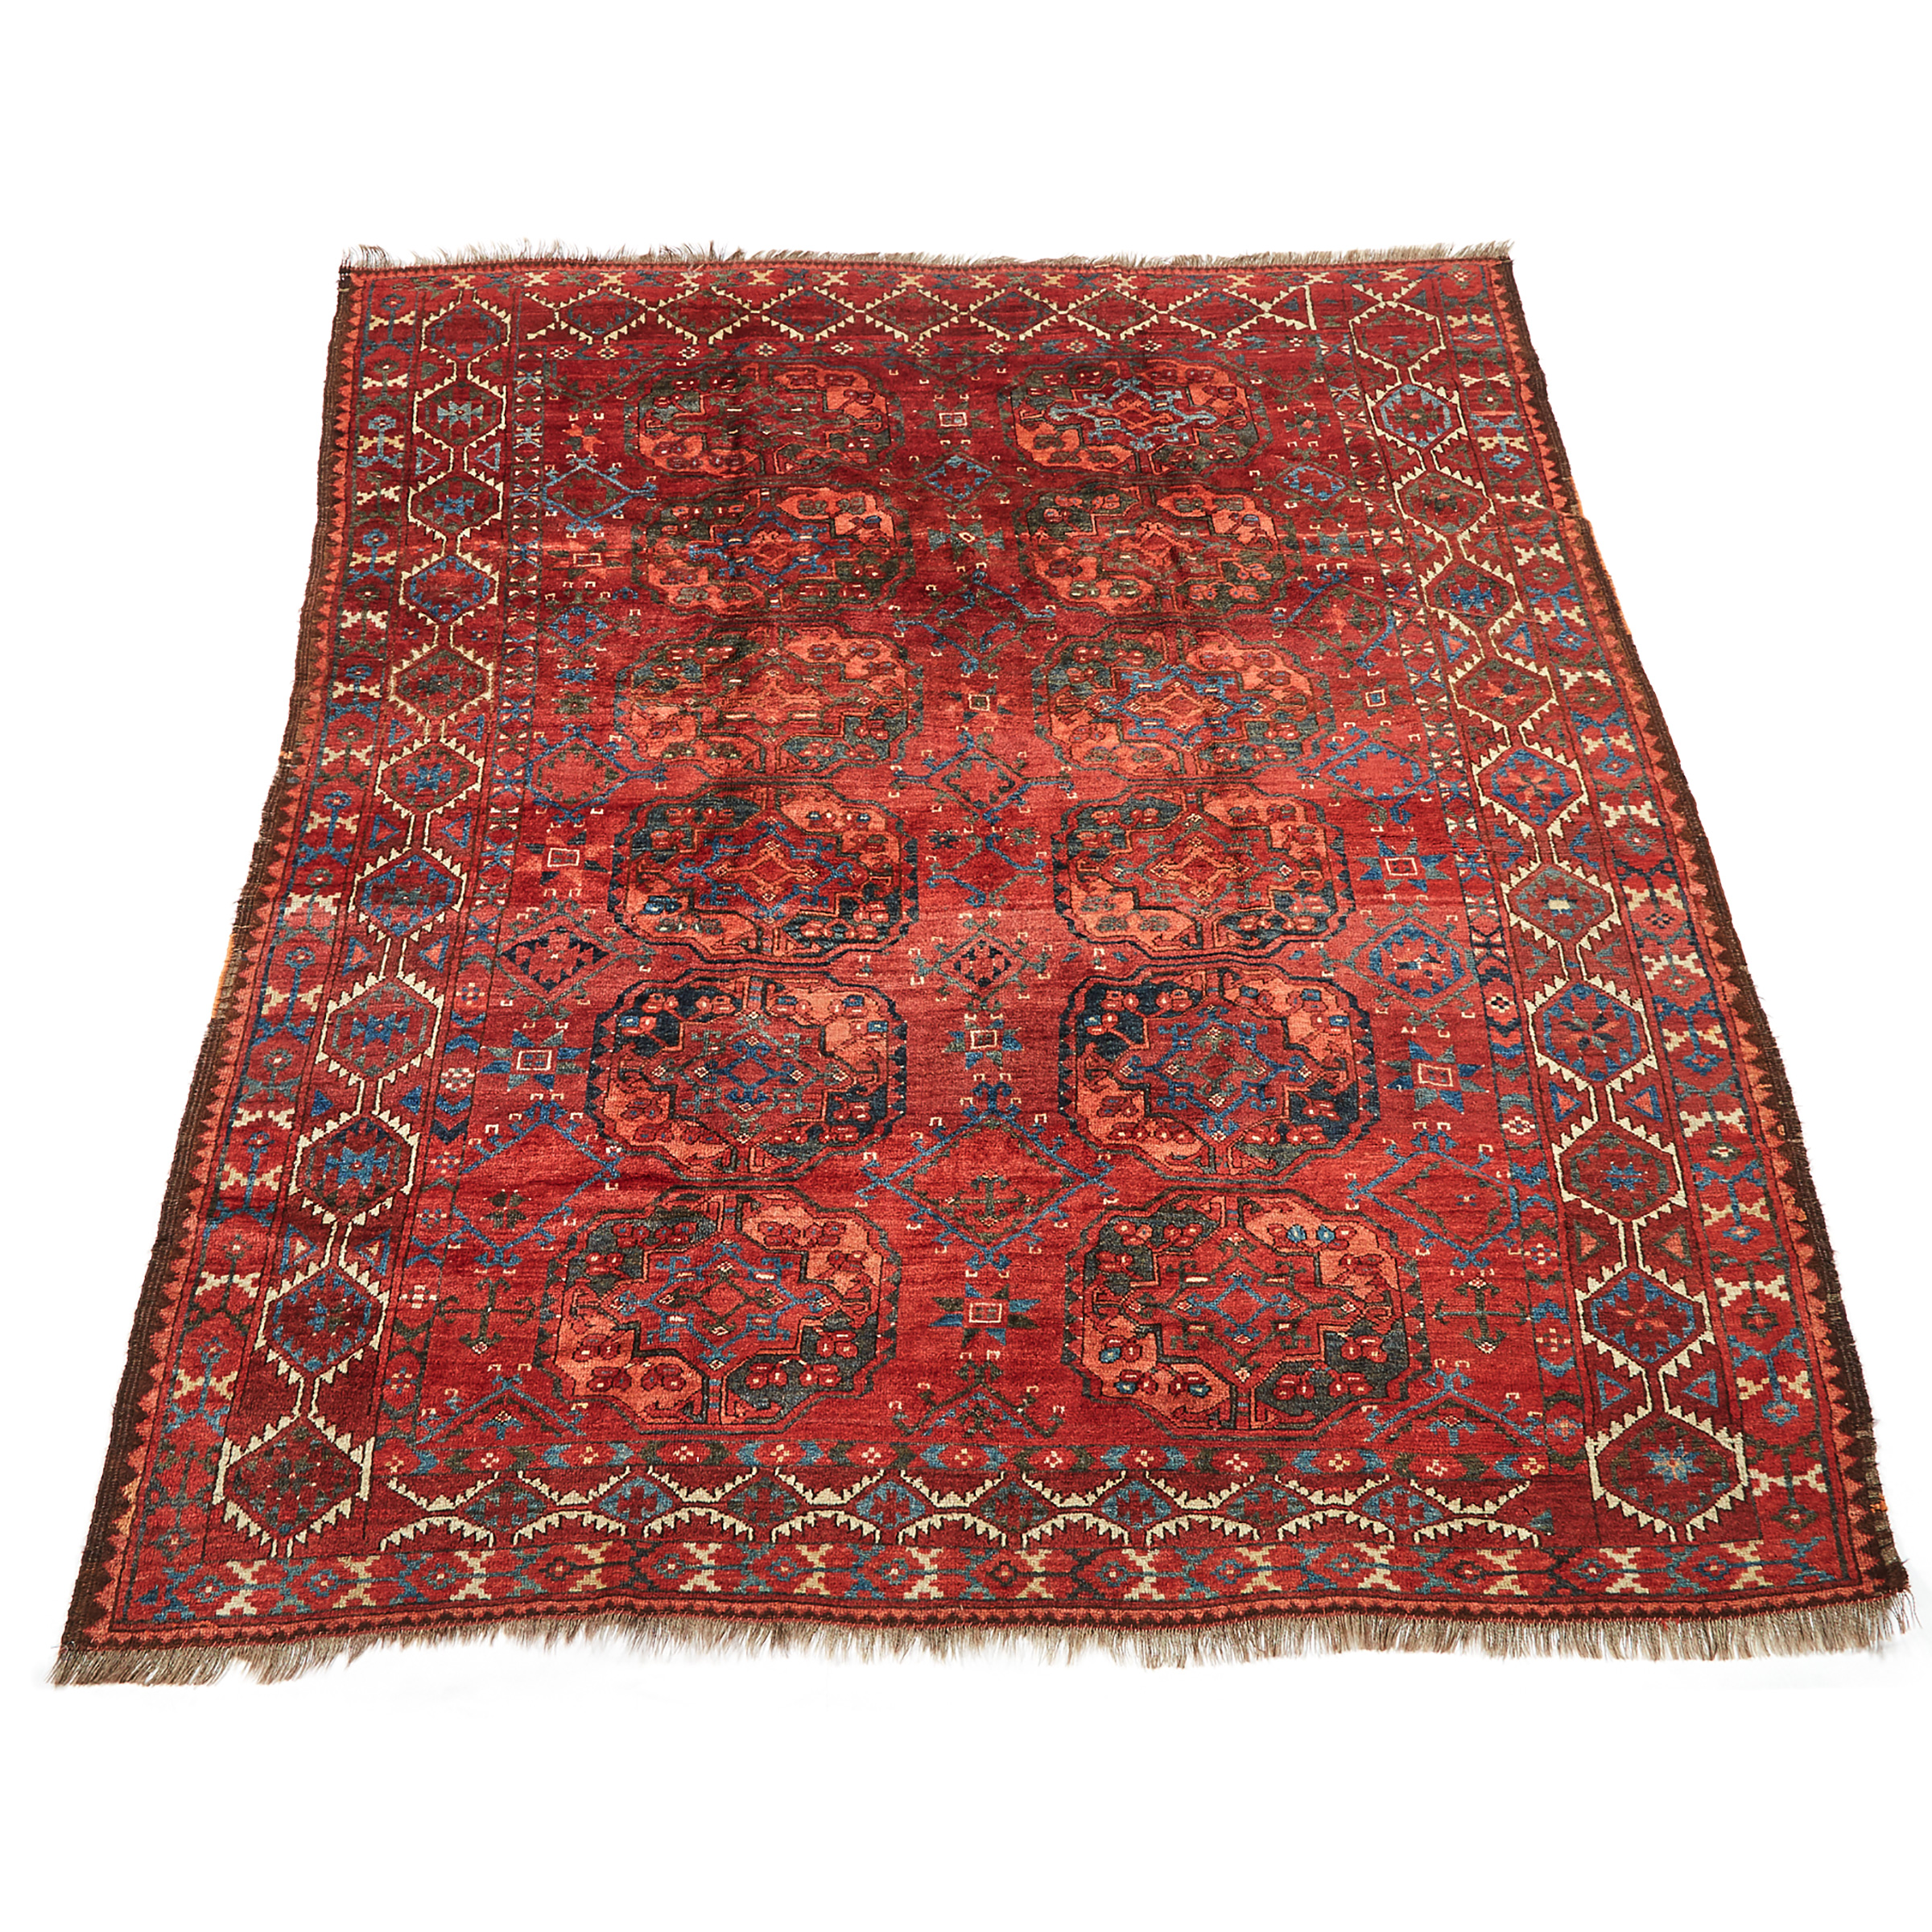 Ersari Main Carpet, Central Asia, early to mid 20th century